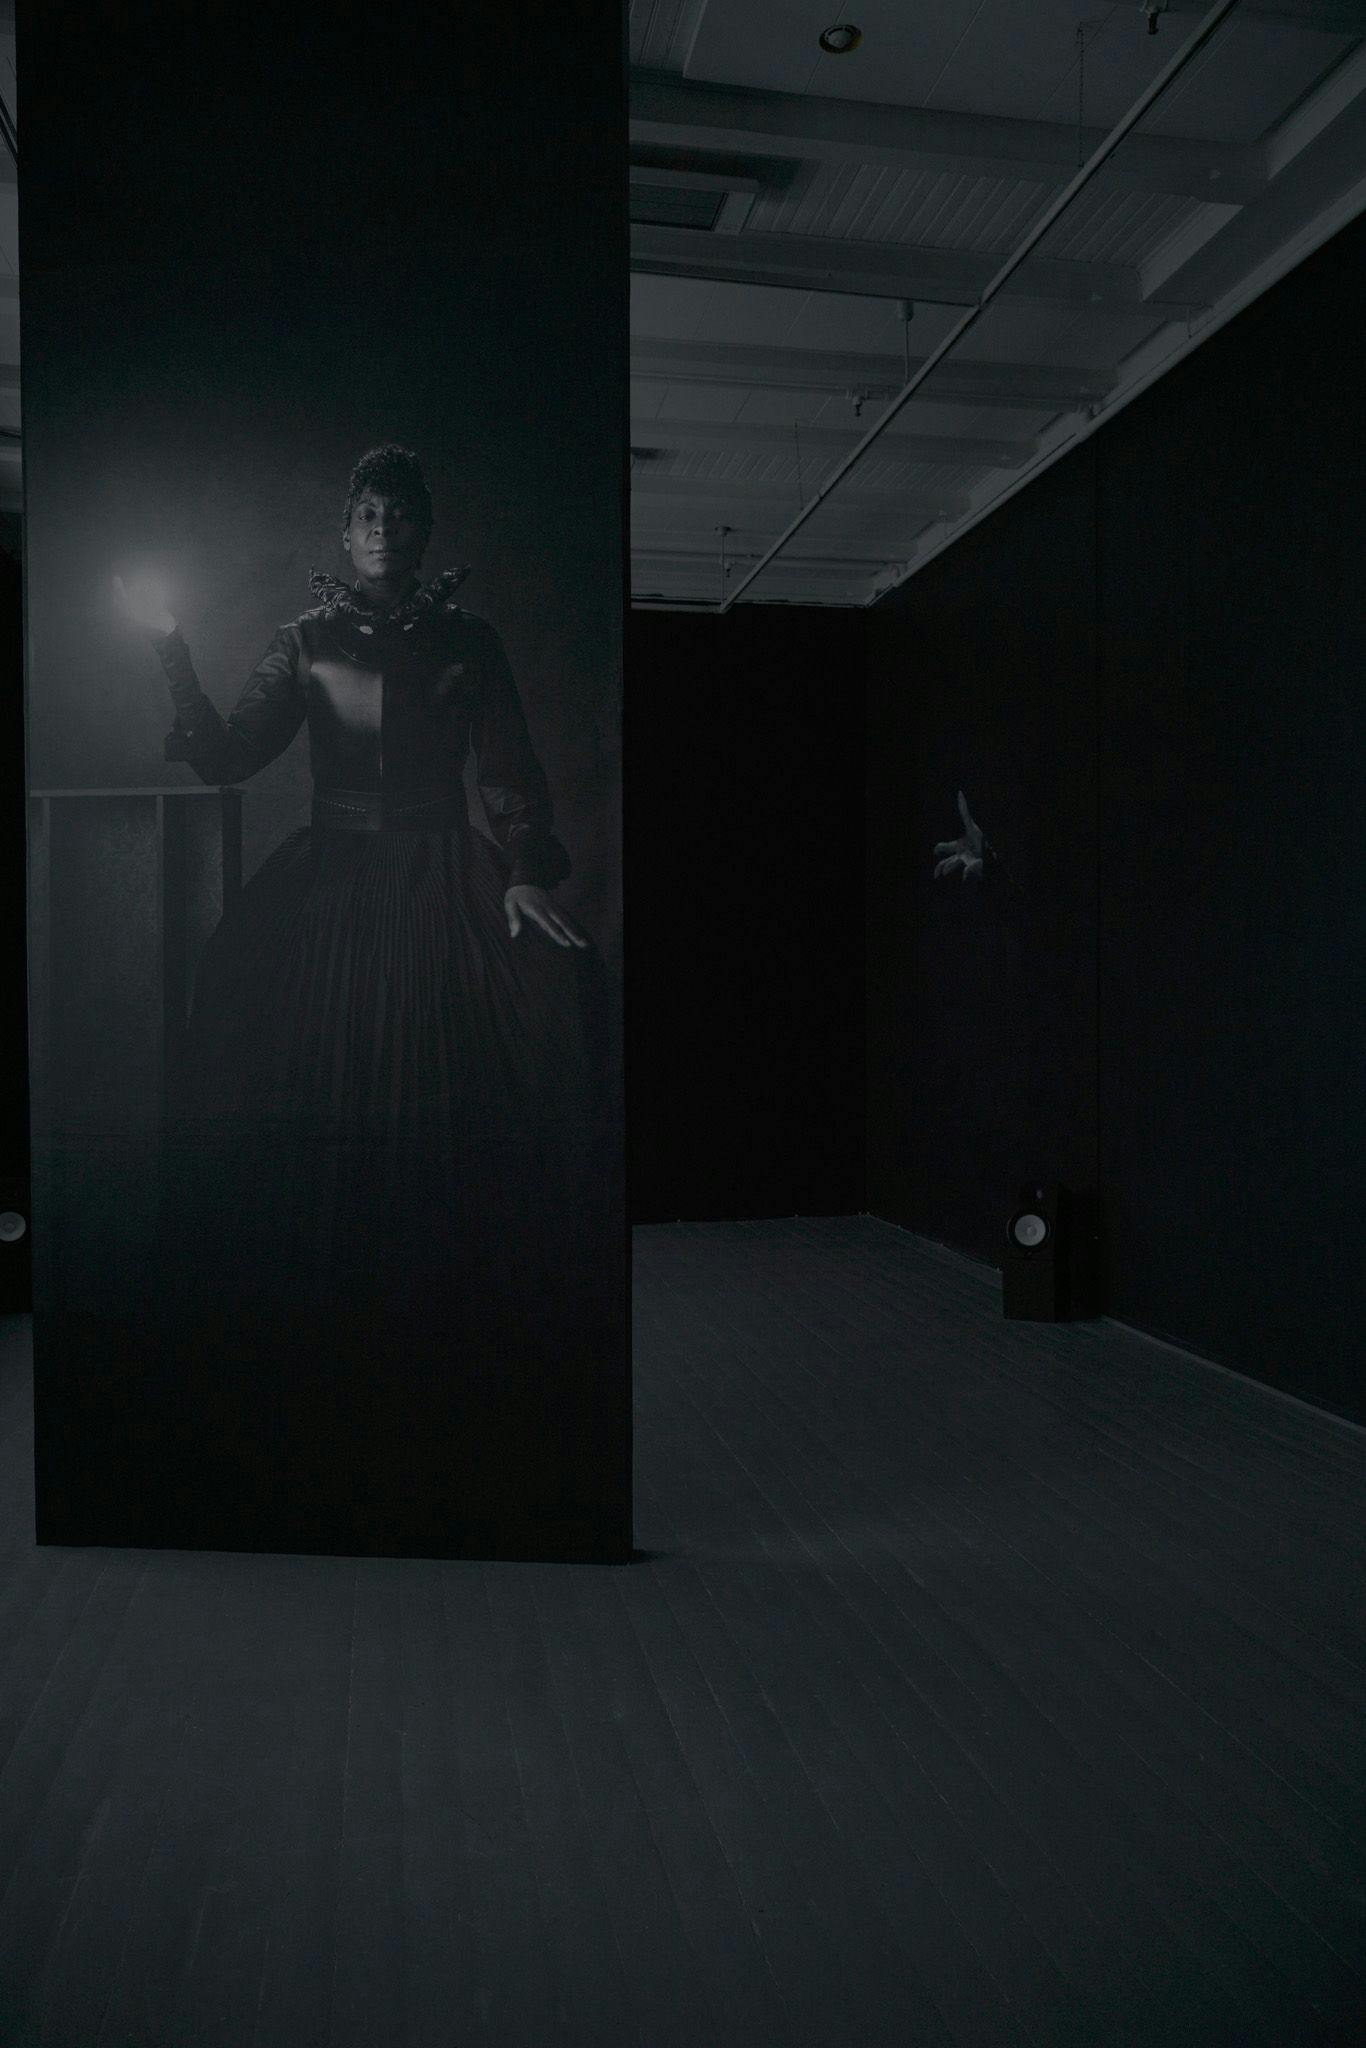 A woman in a black dress holding an orb of light is projected onto a black wall, in a black room.